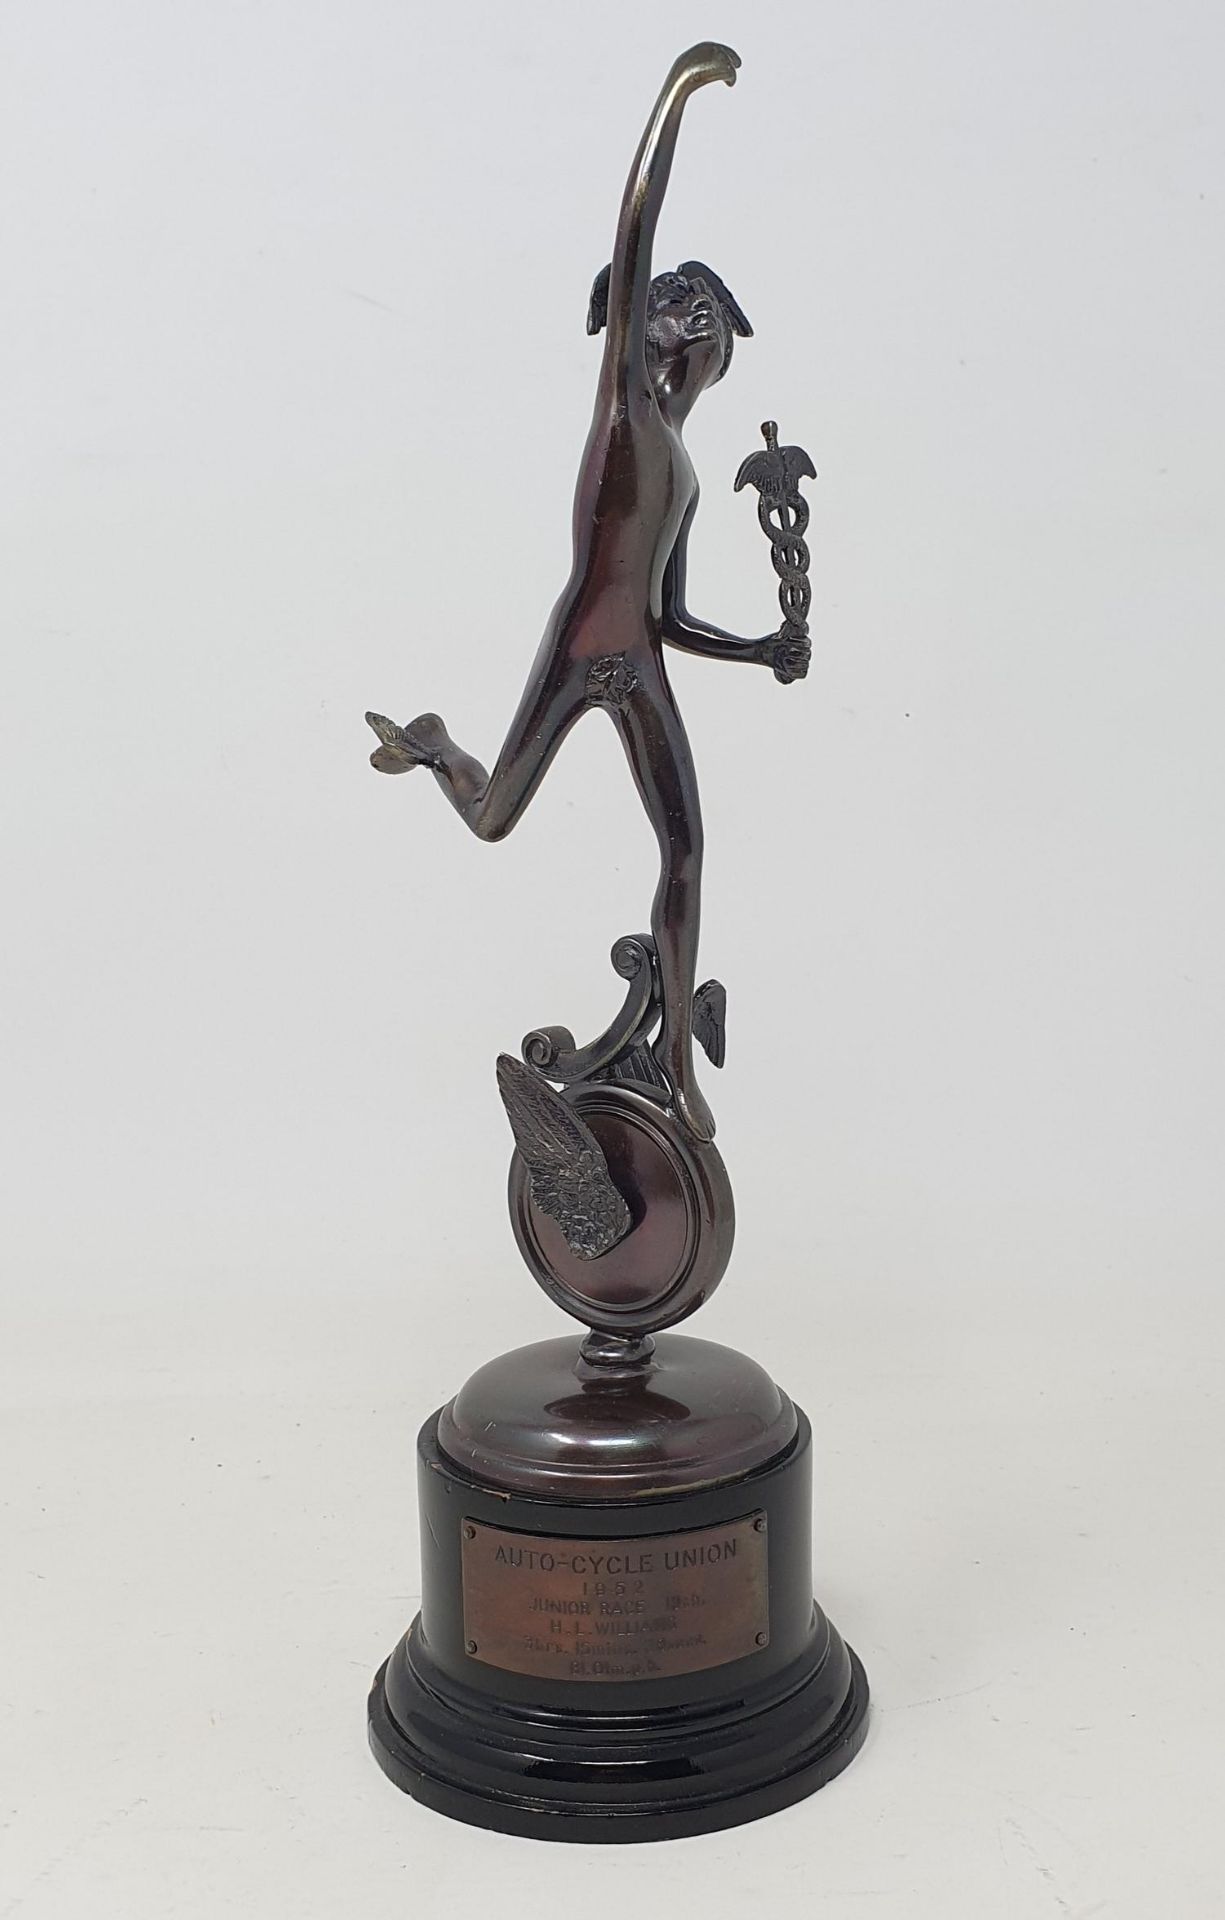 An Isle of Man TT bronze replica trophy, with applied plaque inscribed 'AUTO-CYCLE UNION 1952 JUNIOR